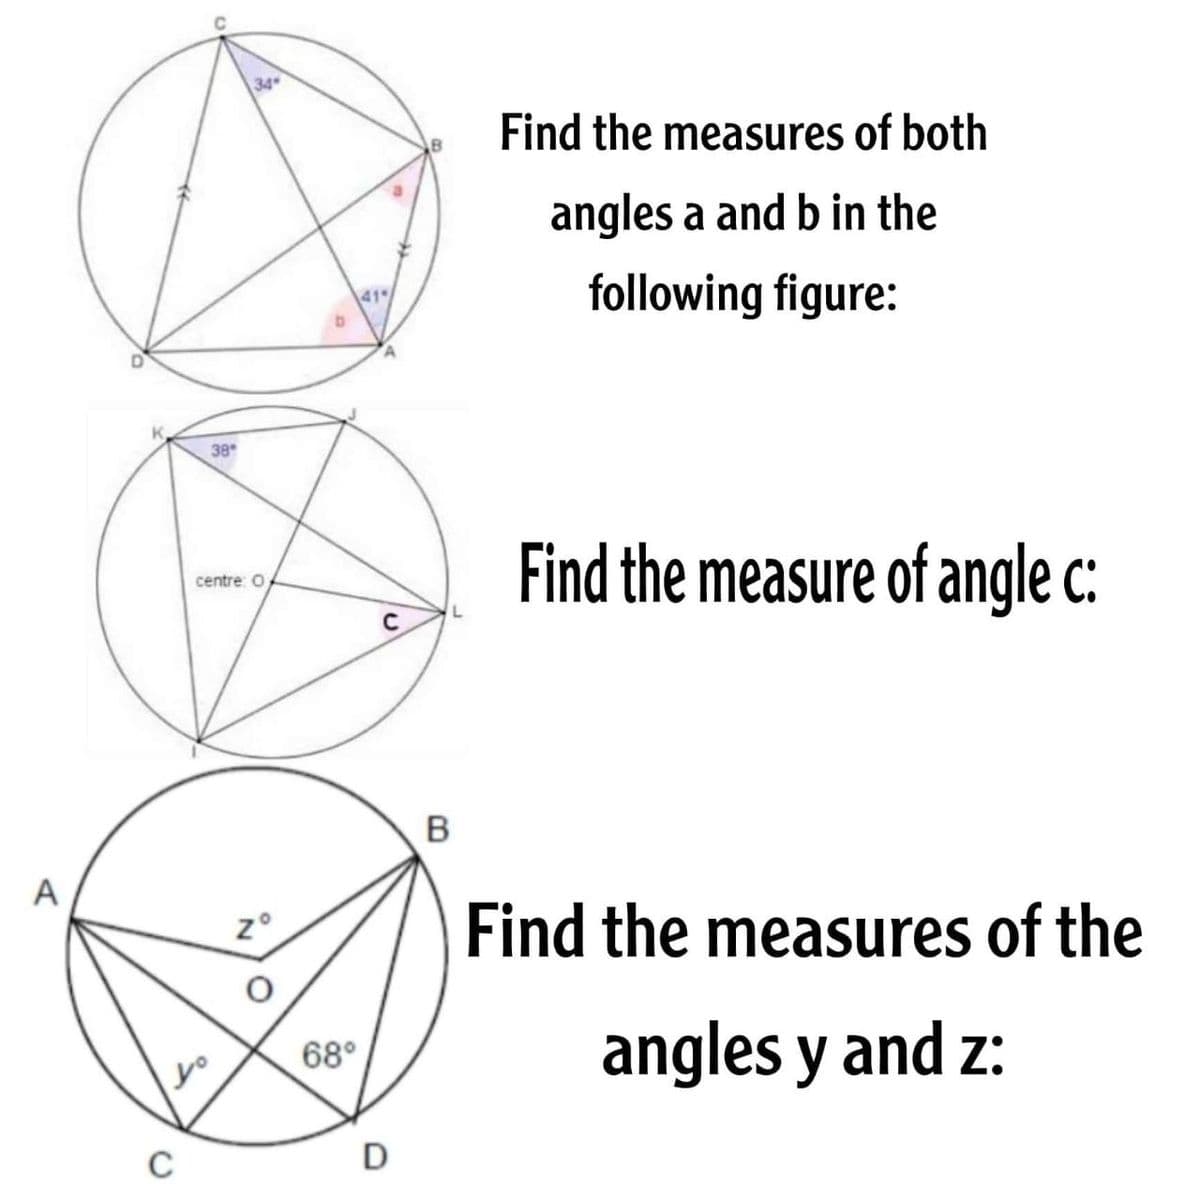 yo
C
34
38
centre: O
Zº
68°
41-
с
D
Find the measures of both
angles a and b in the
following figure:
Find the measure of angle c:
B
Find the measures of the
angles y and z: